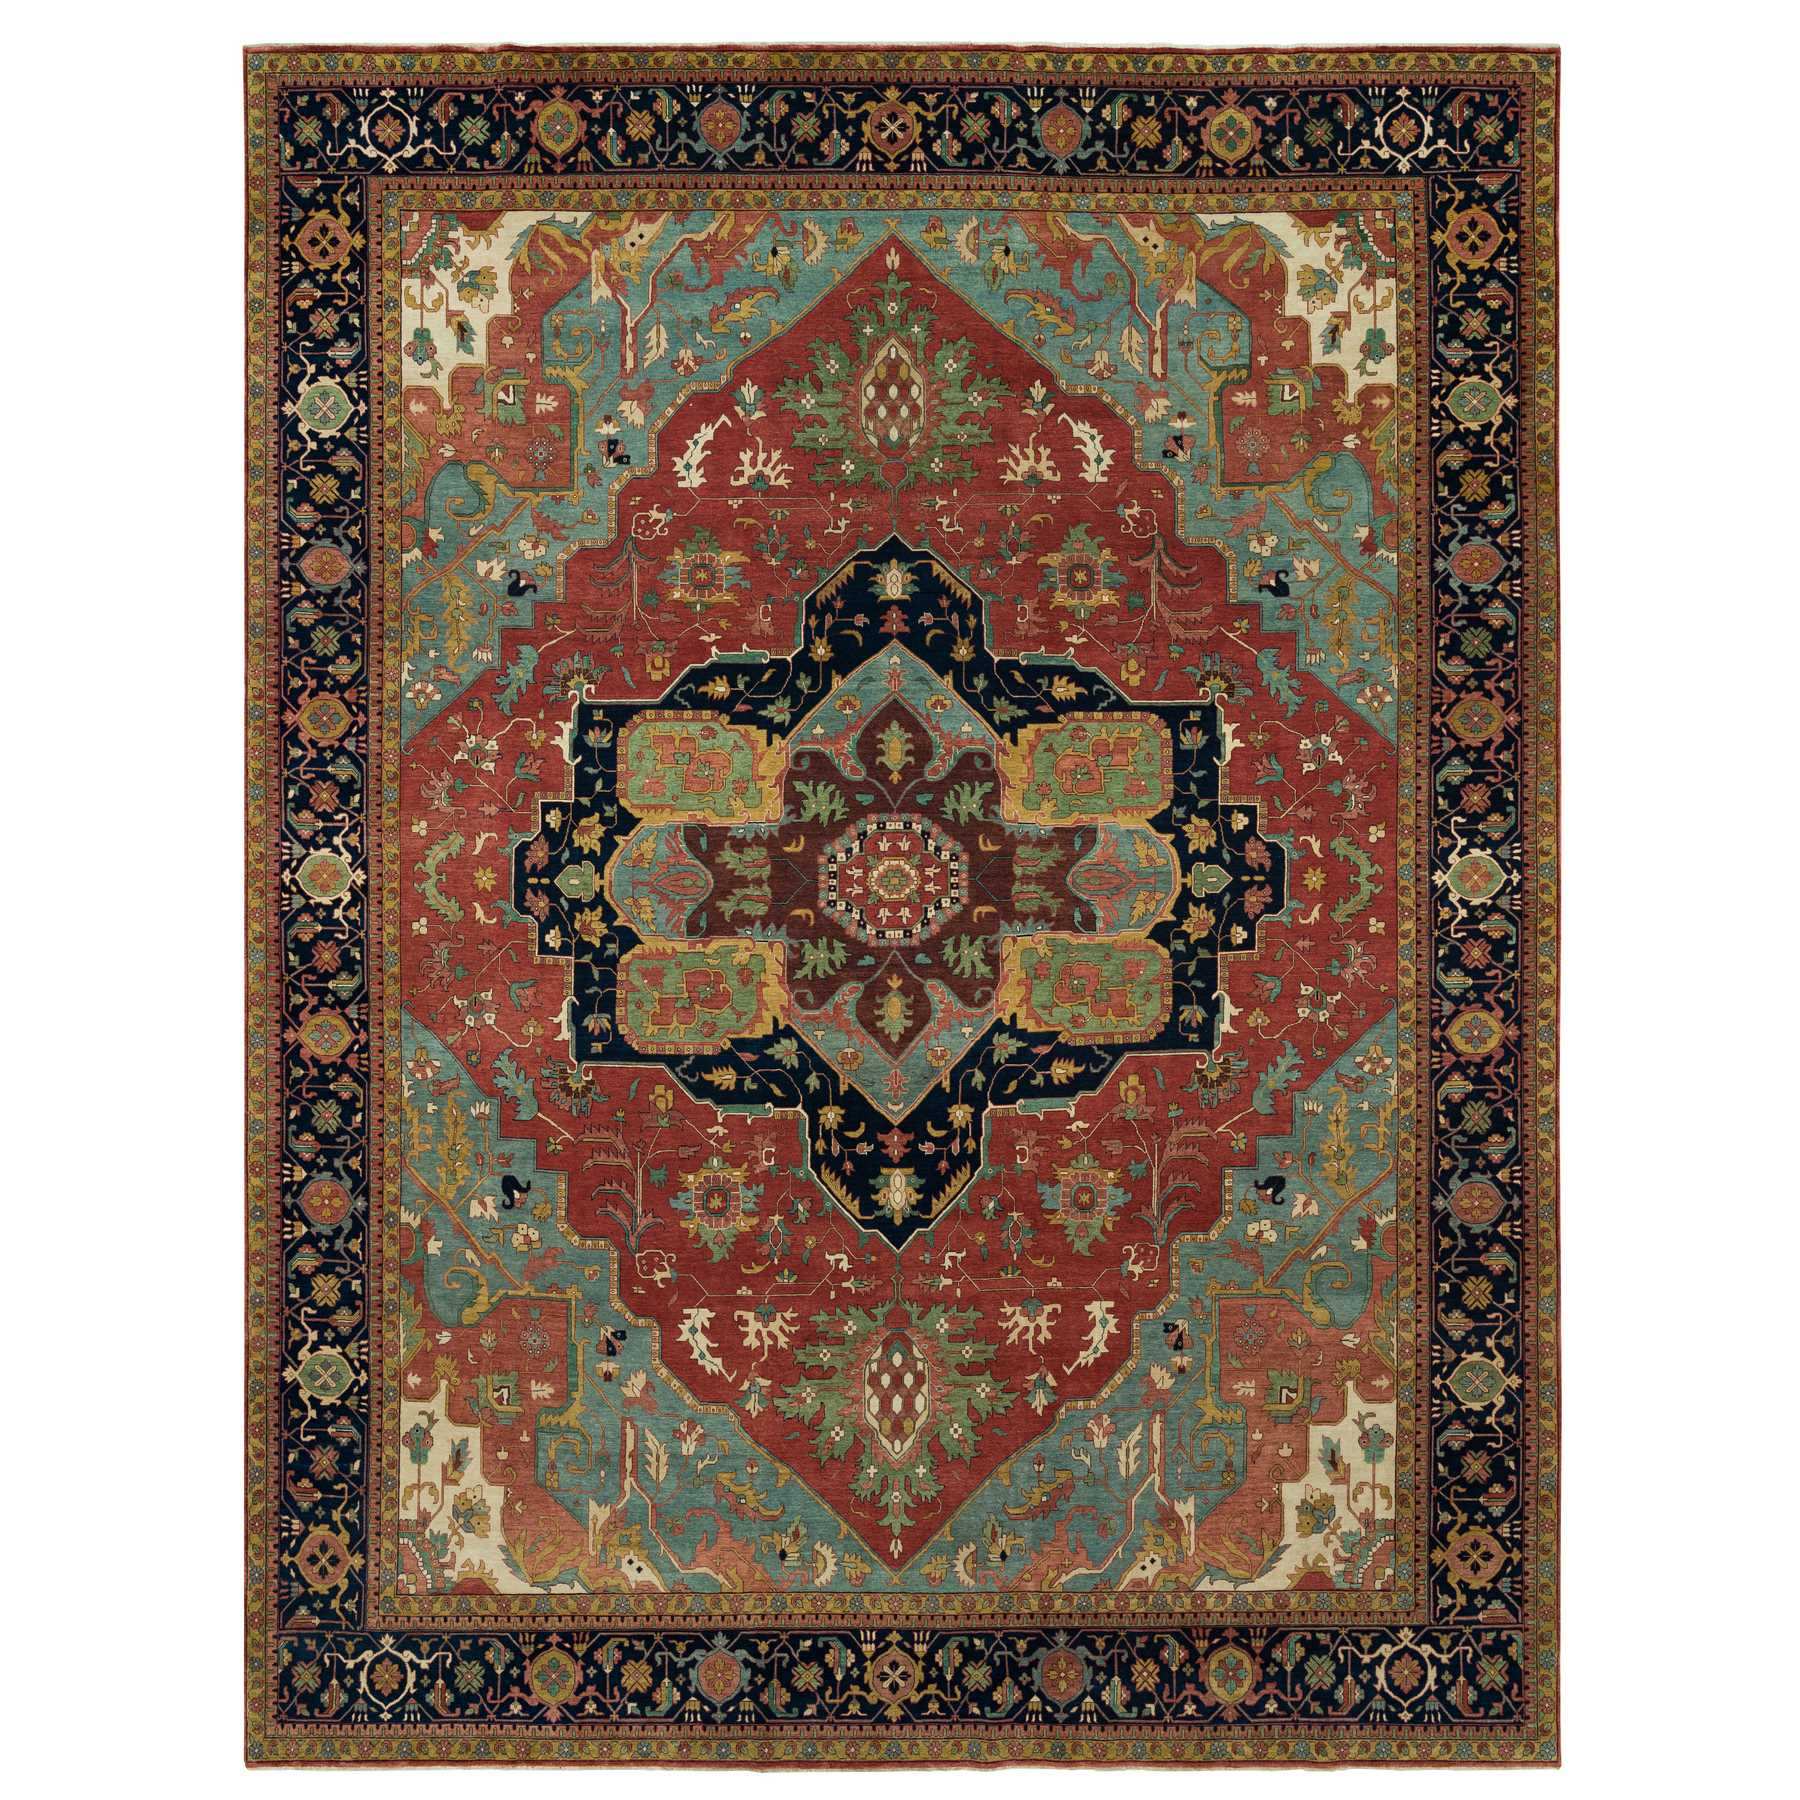  Wool Hand-Knotted Area Rug 13'10